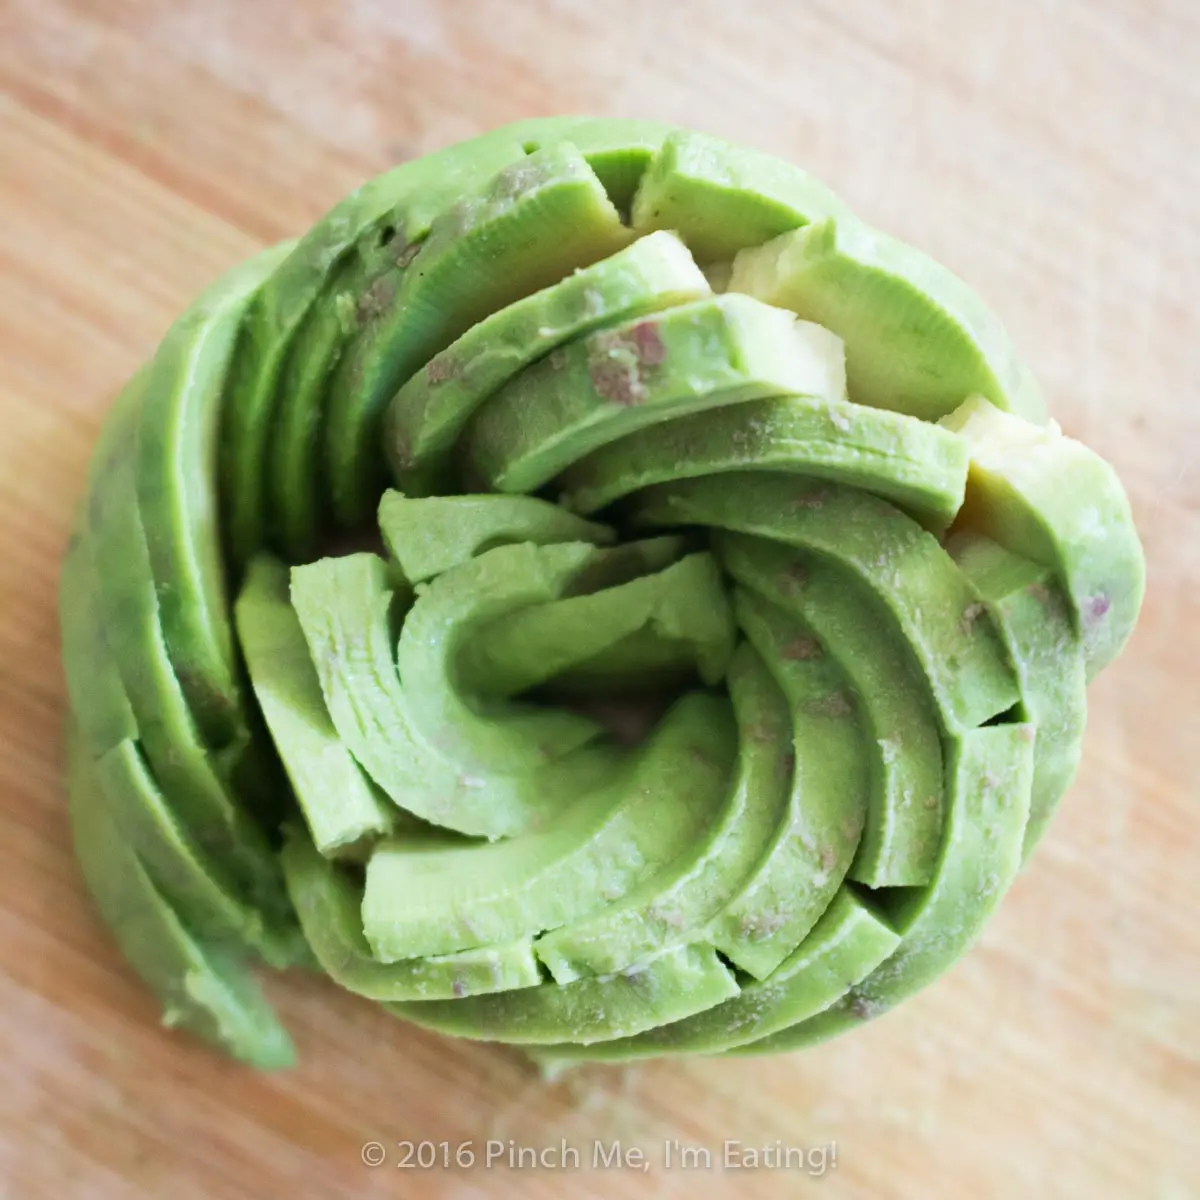 An edible rose made from spiraled avocado slices.